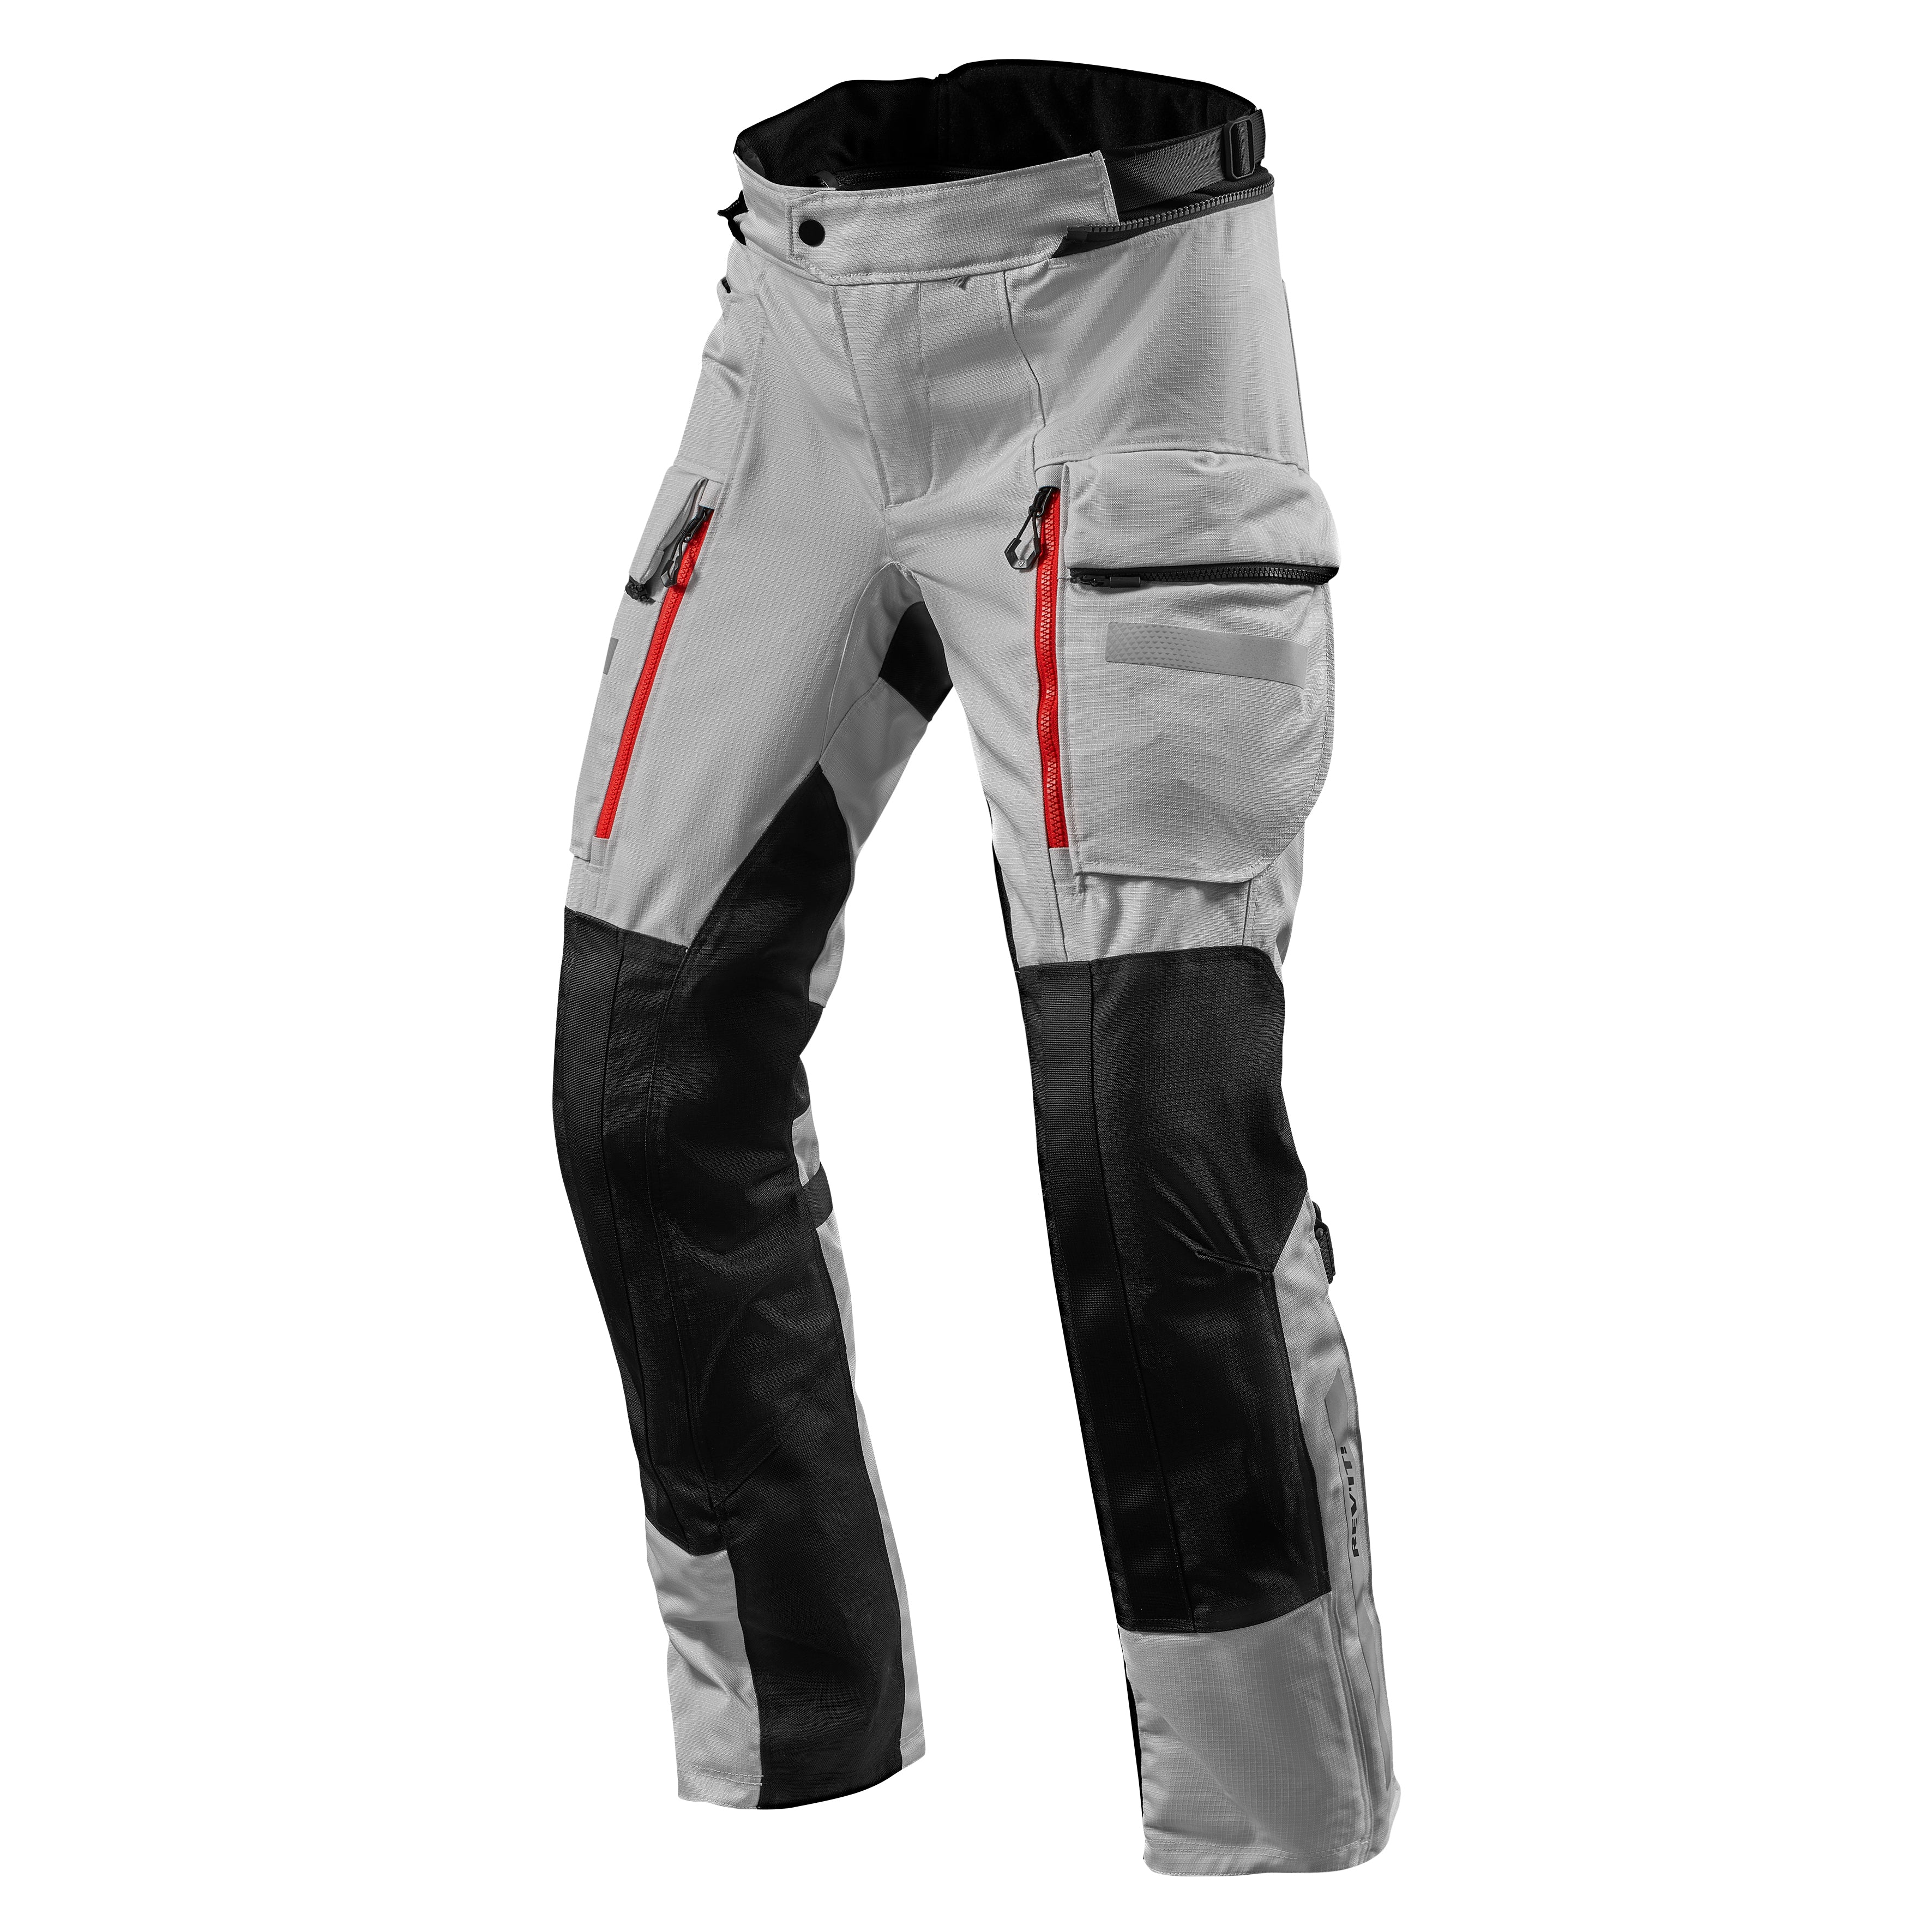 Winter, Motorcycle Riding Pants – Fabric Shell